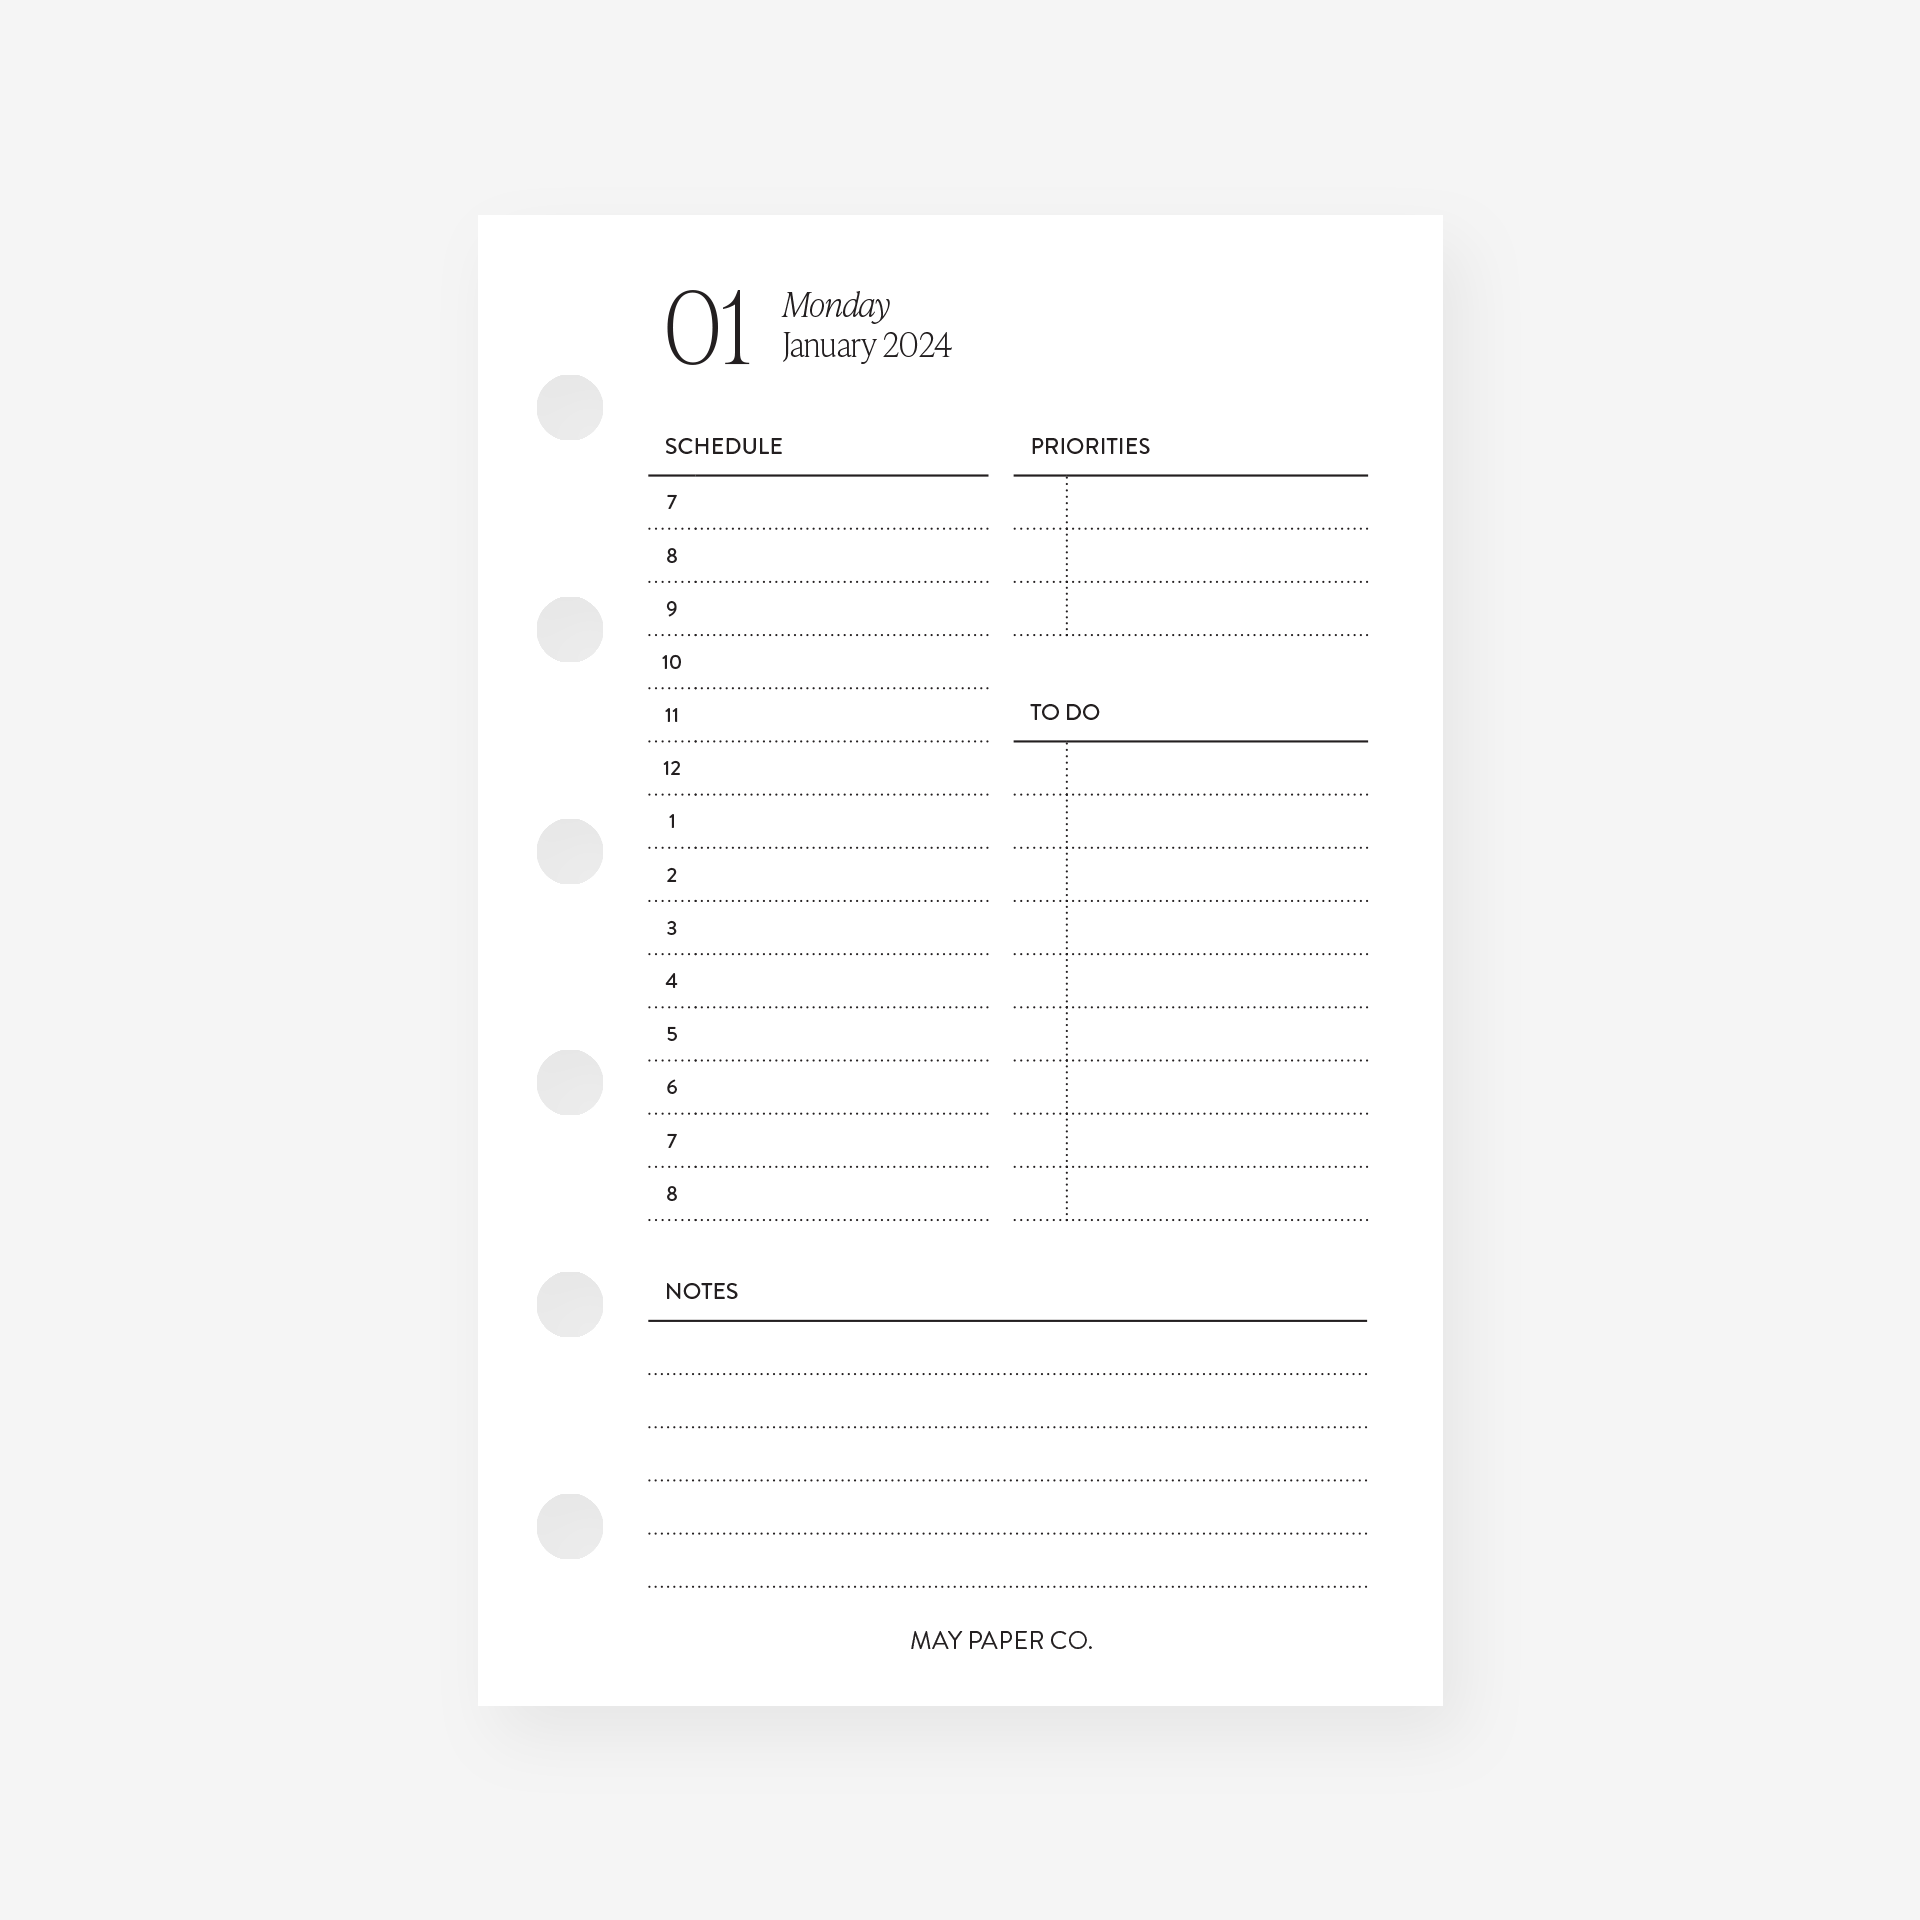 2023/2024 Daily with Hourly Schedule Planner Insert Dated DO1P